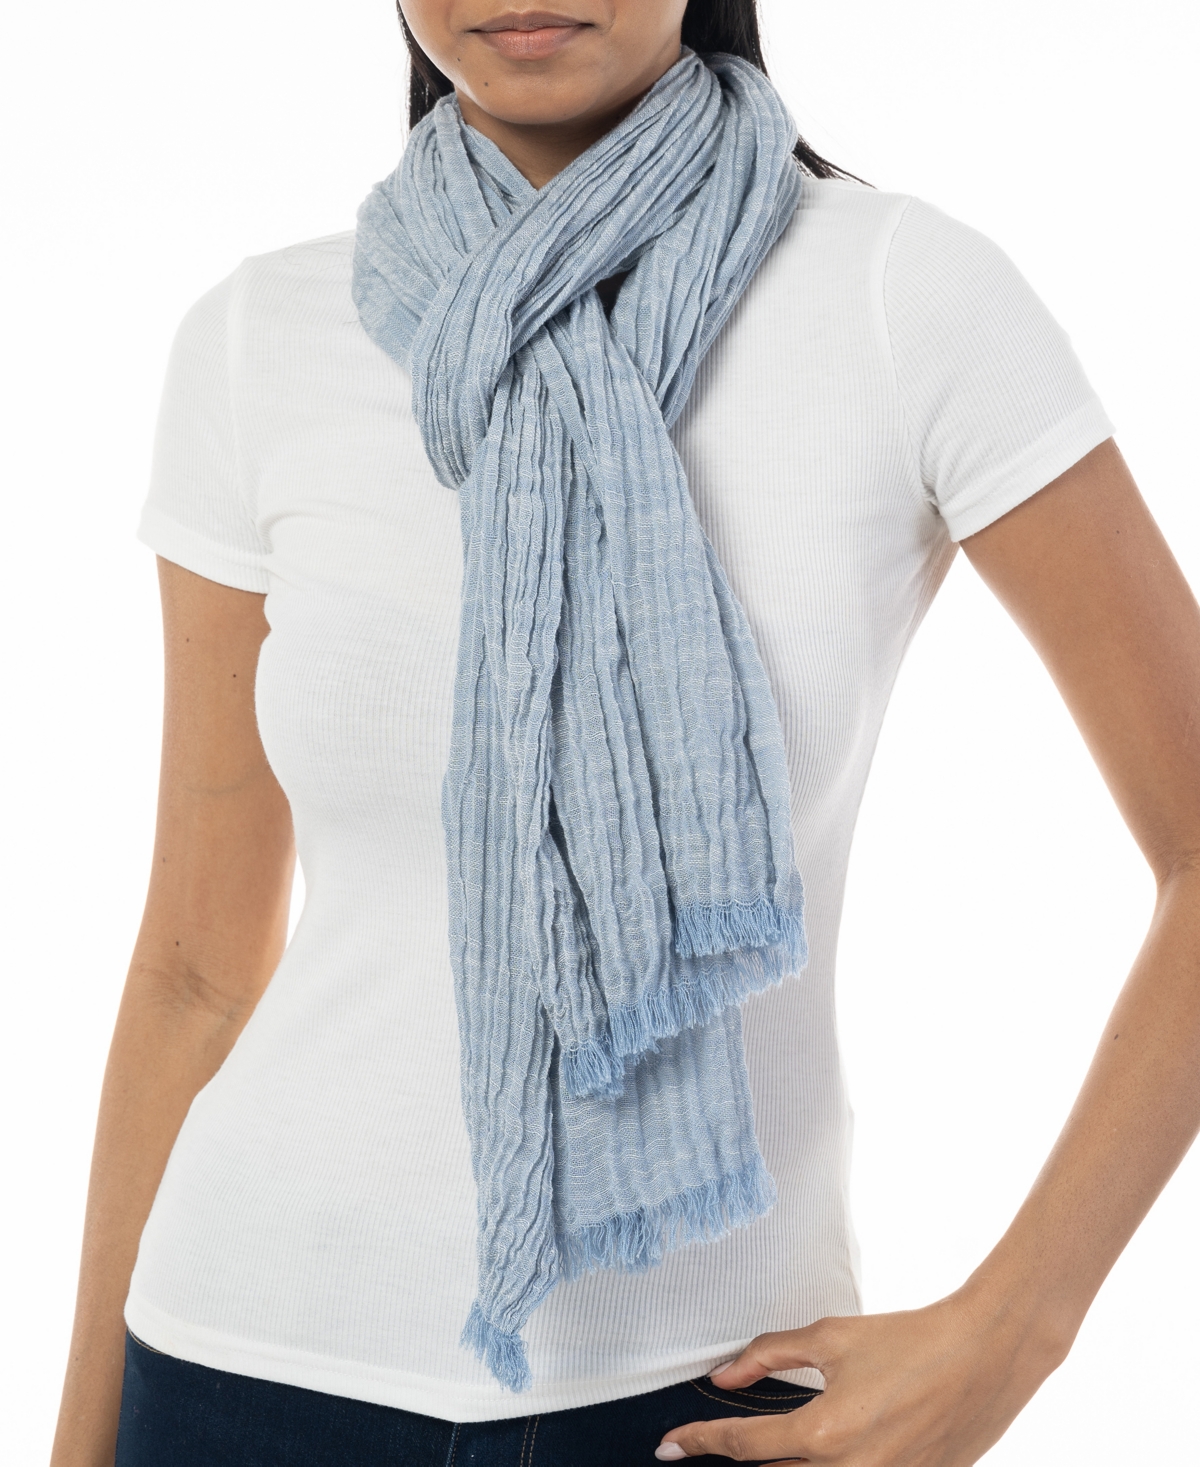 Women's Textured Linen-Look Scarf, Created for Macy's - Black